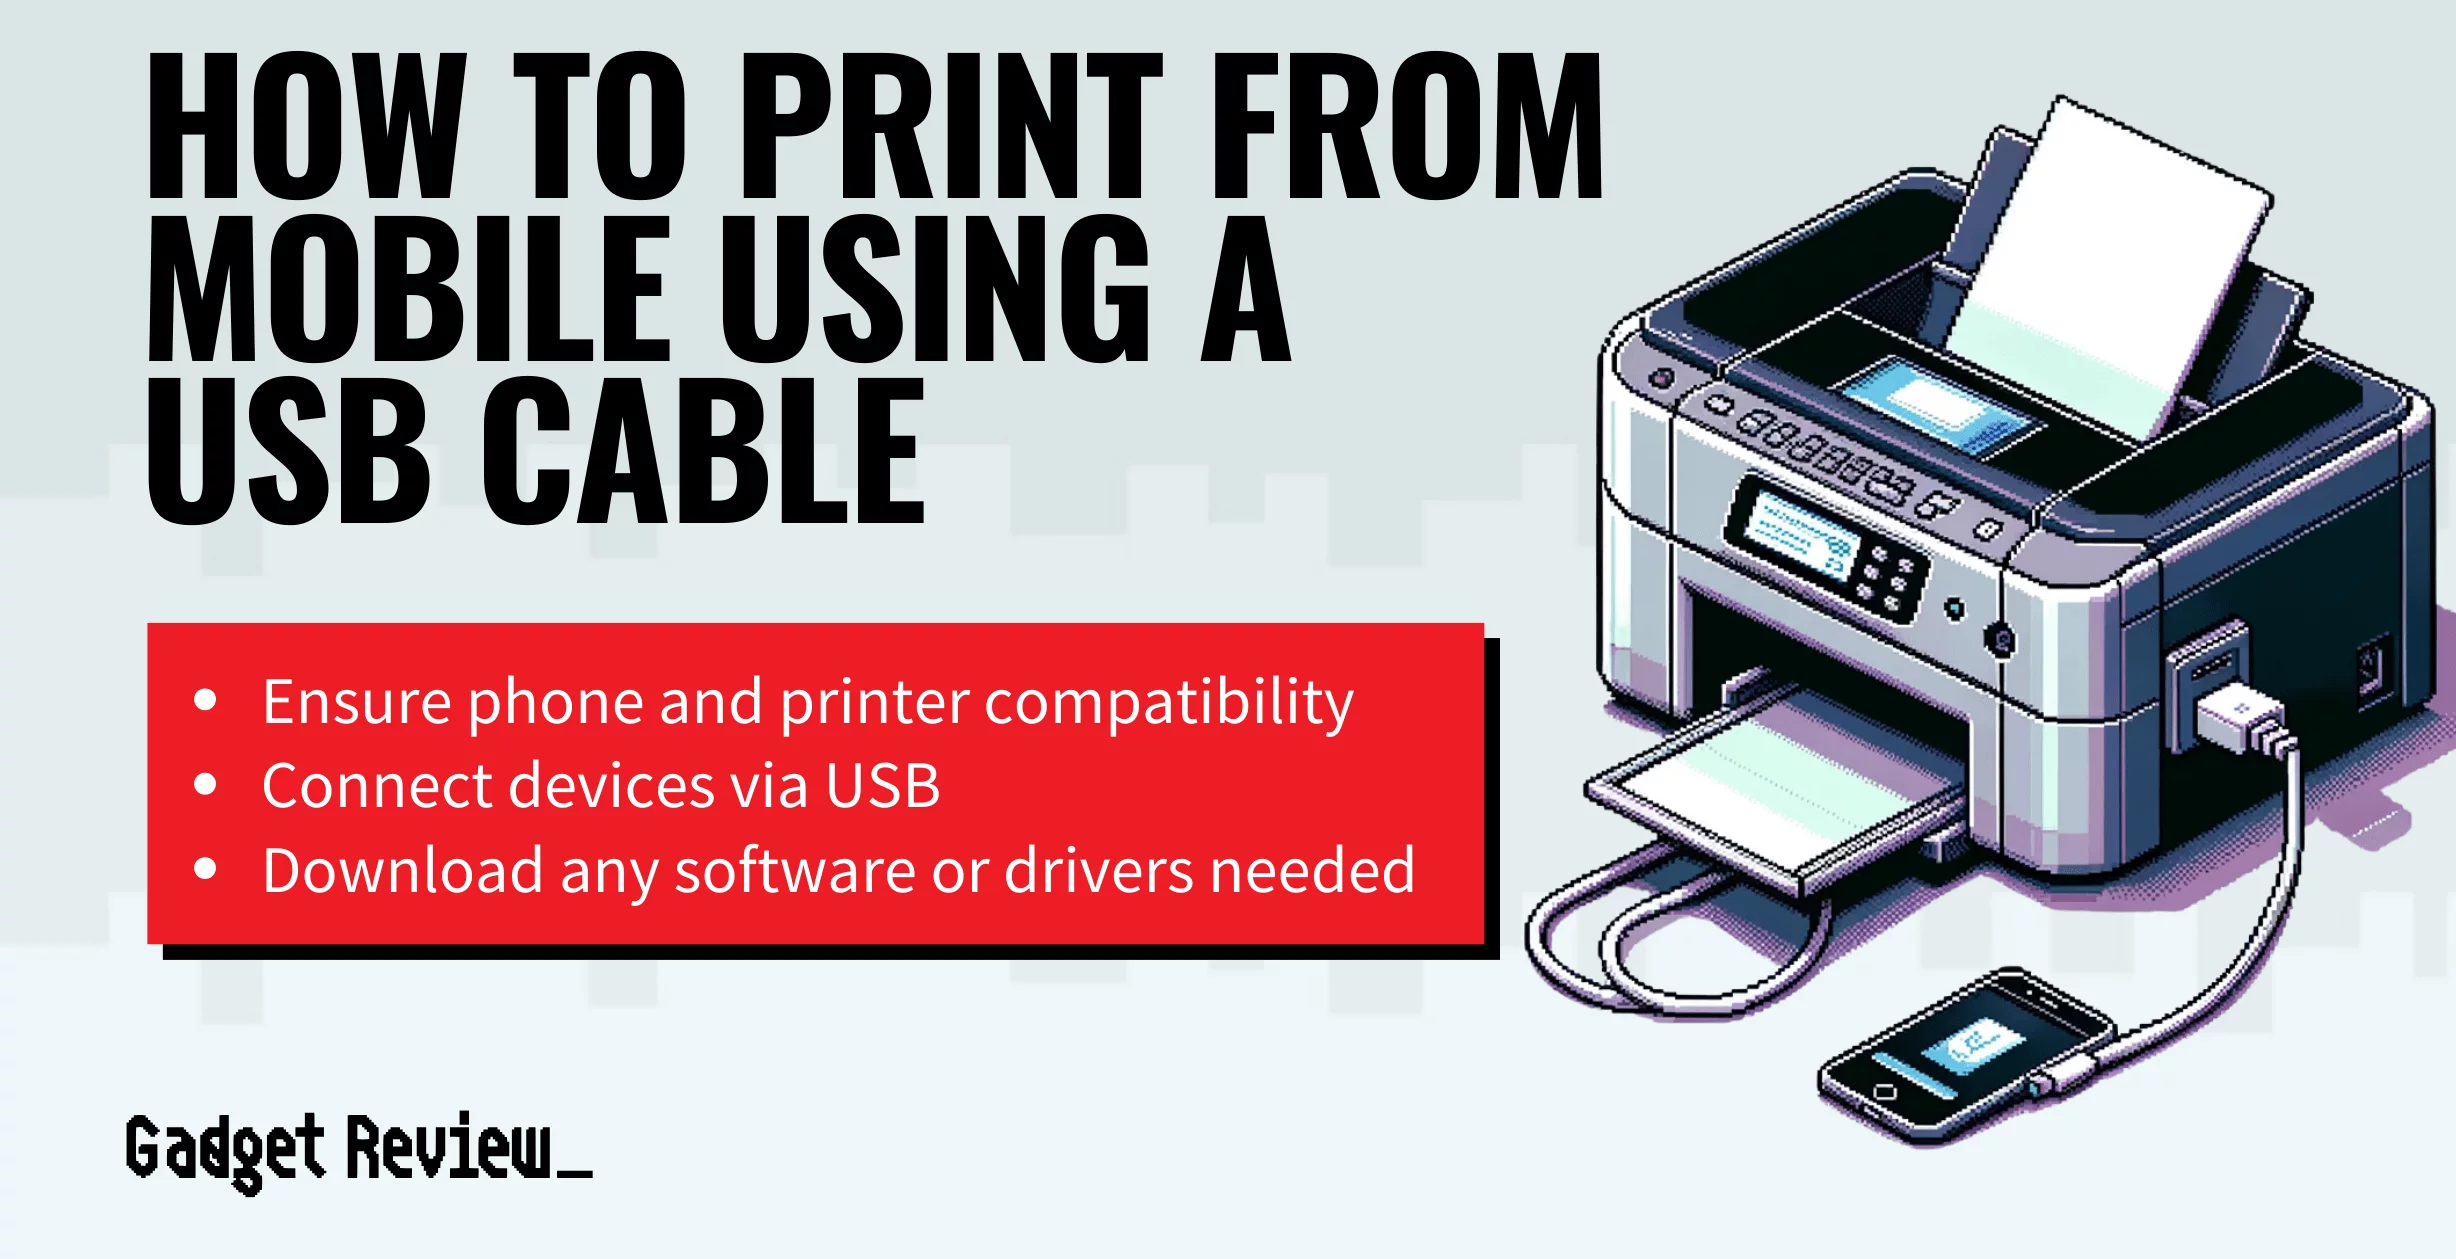 how to print from mobile using usb cable guide